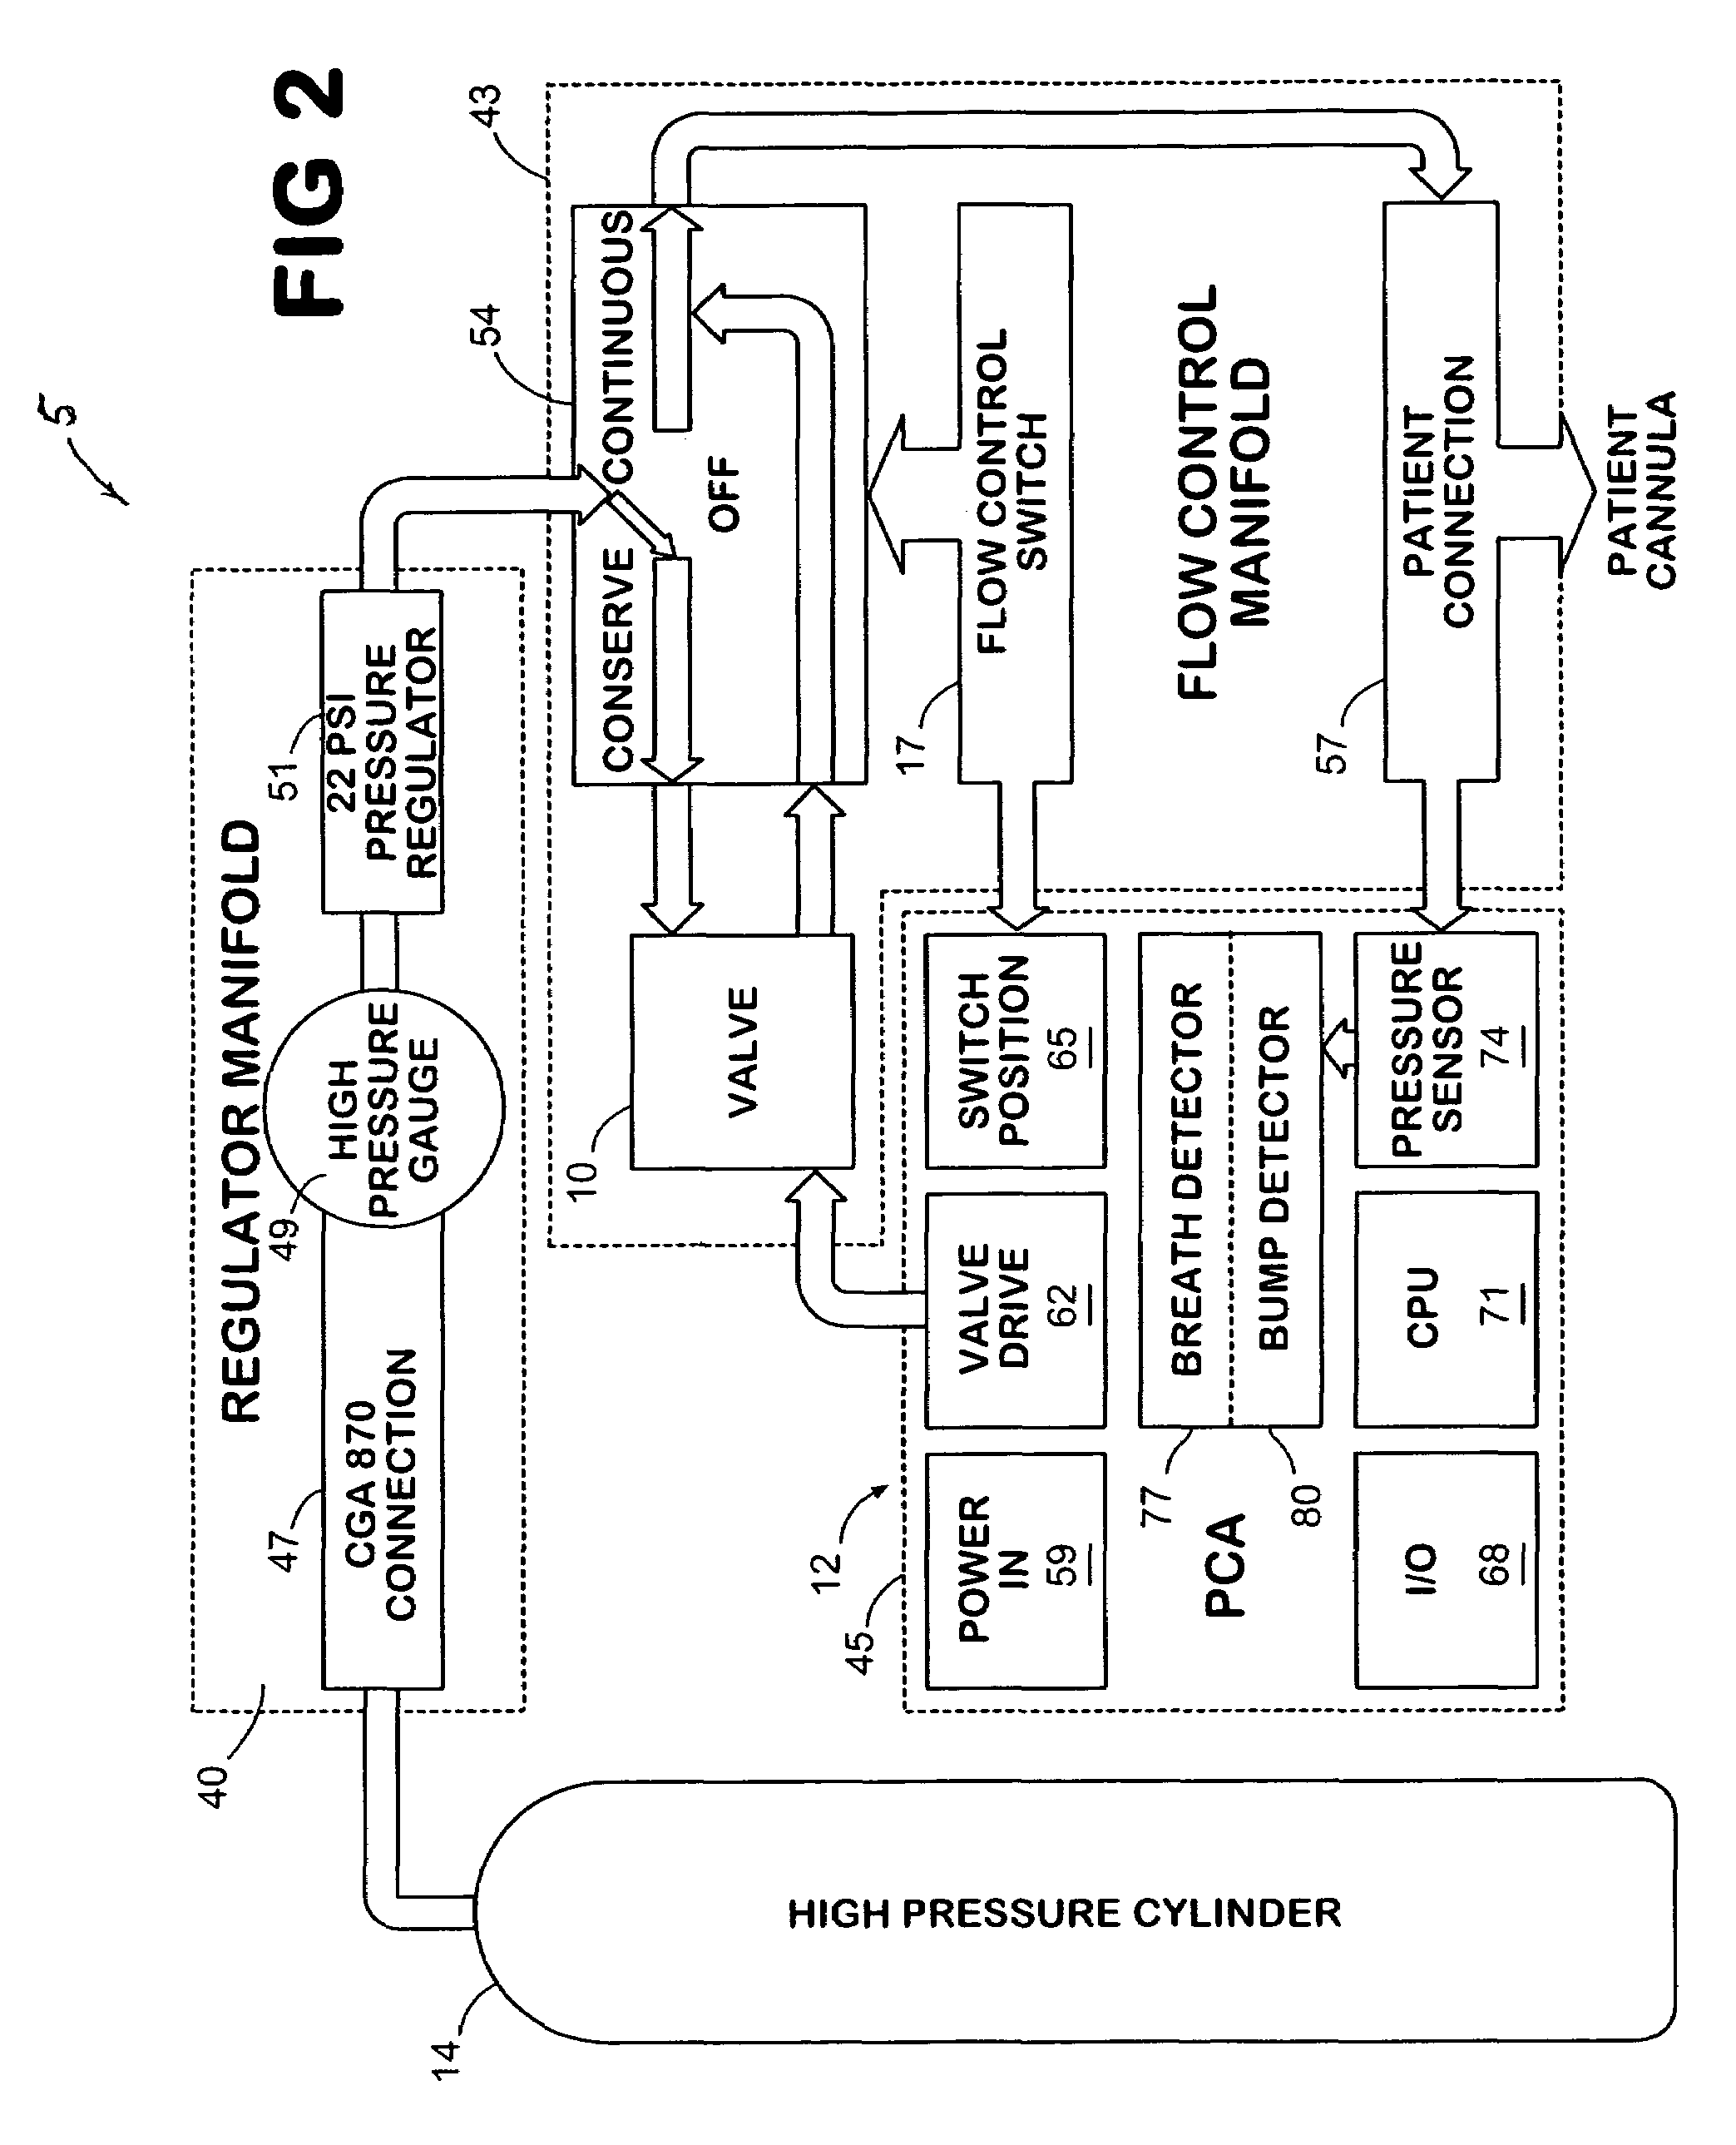 Gas conserving device